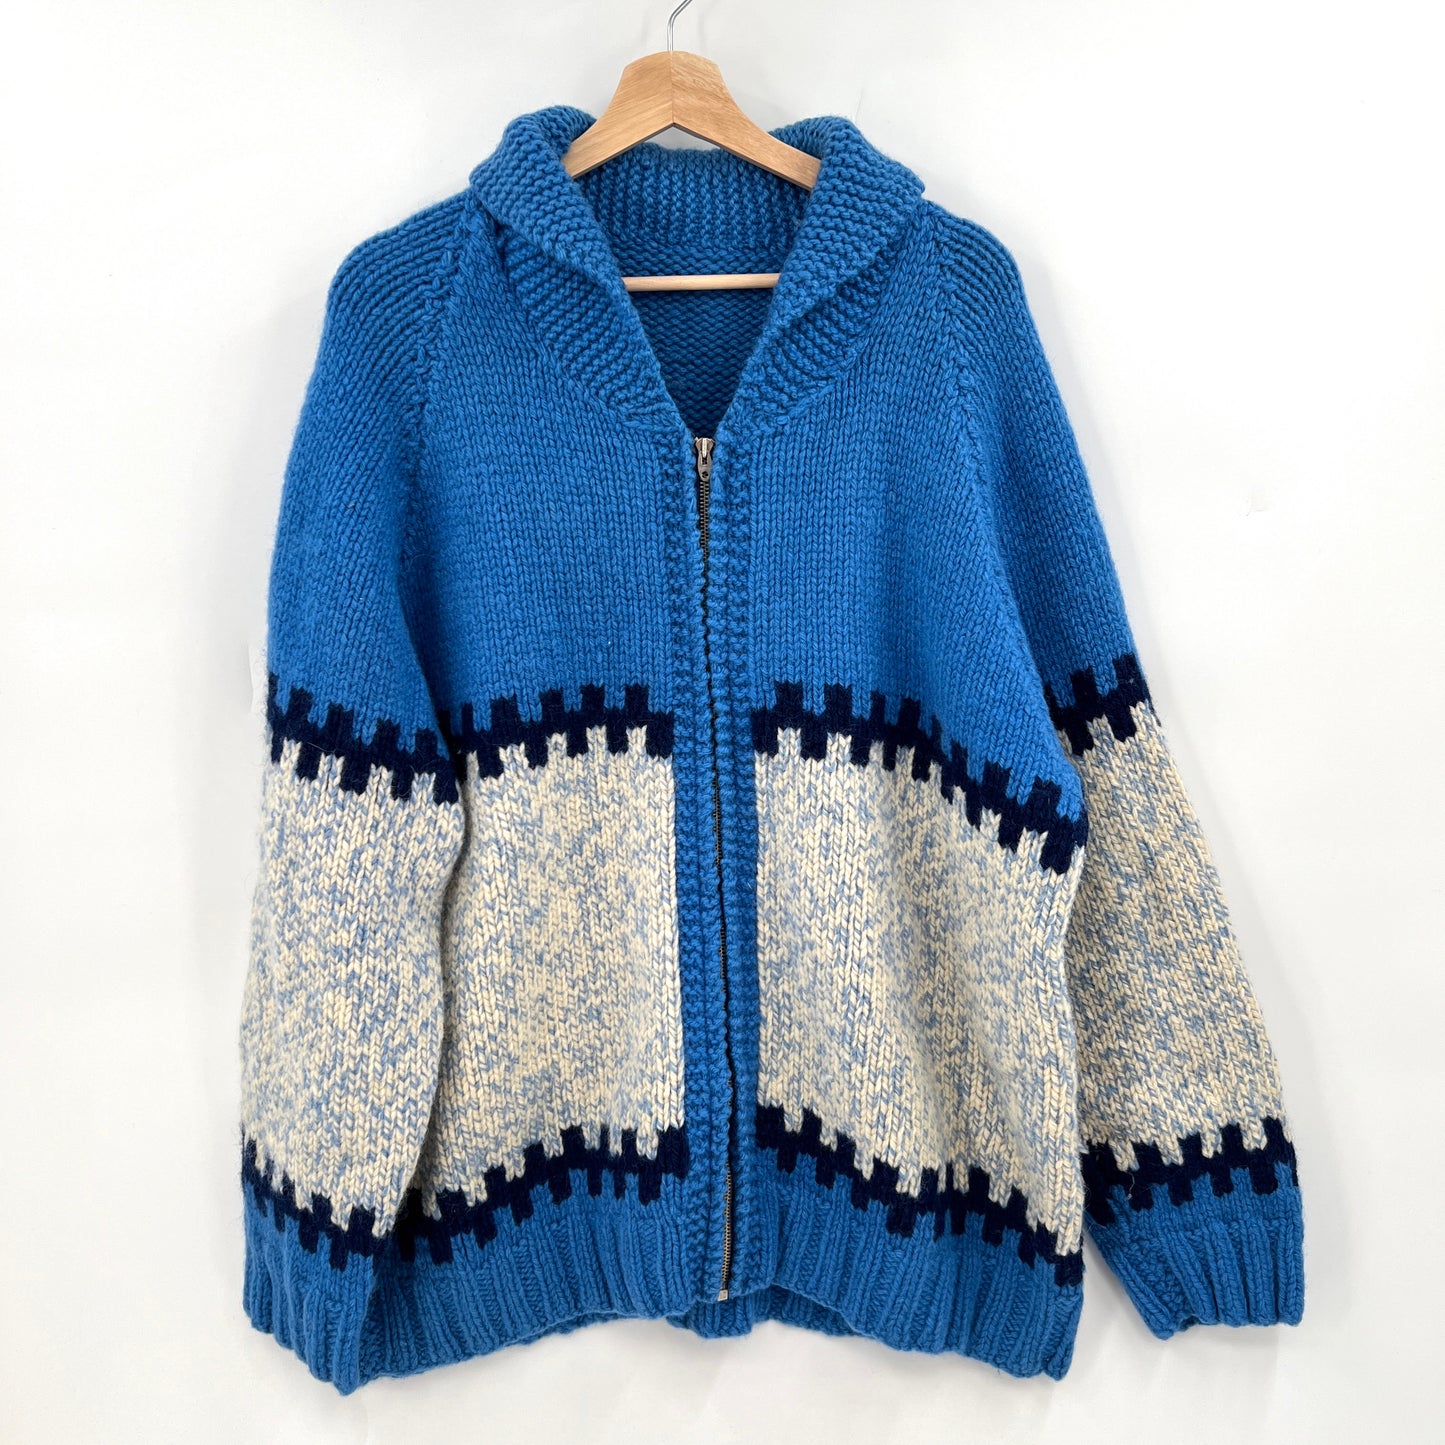 SOLD. Vintage Thick Wool Cowichan Style Cardigan XL-XXL